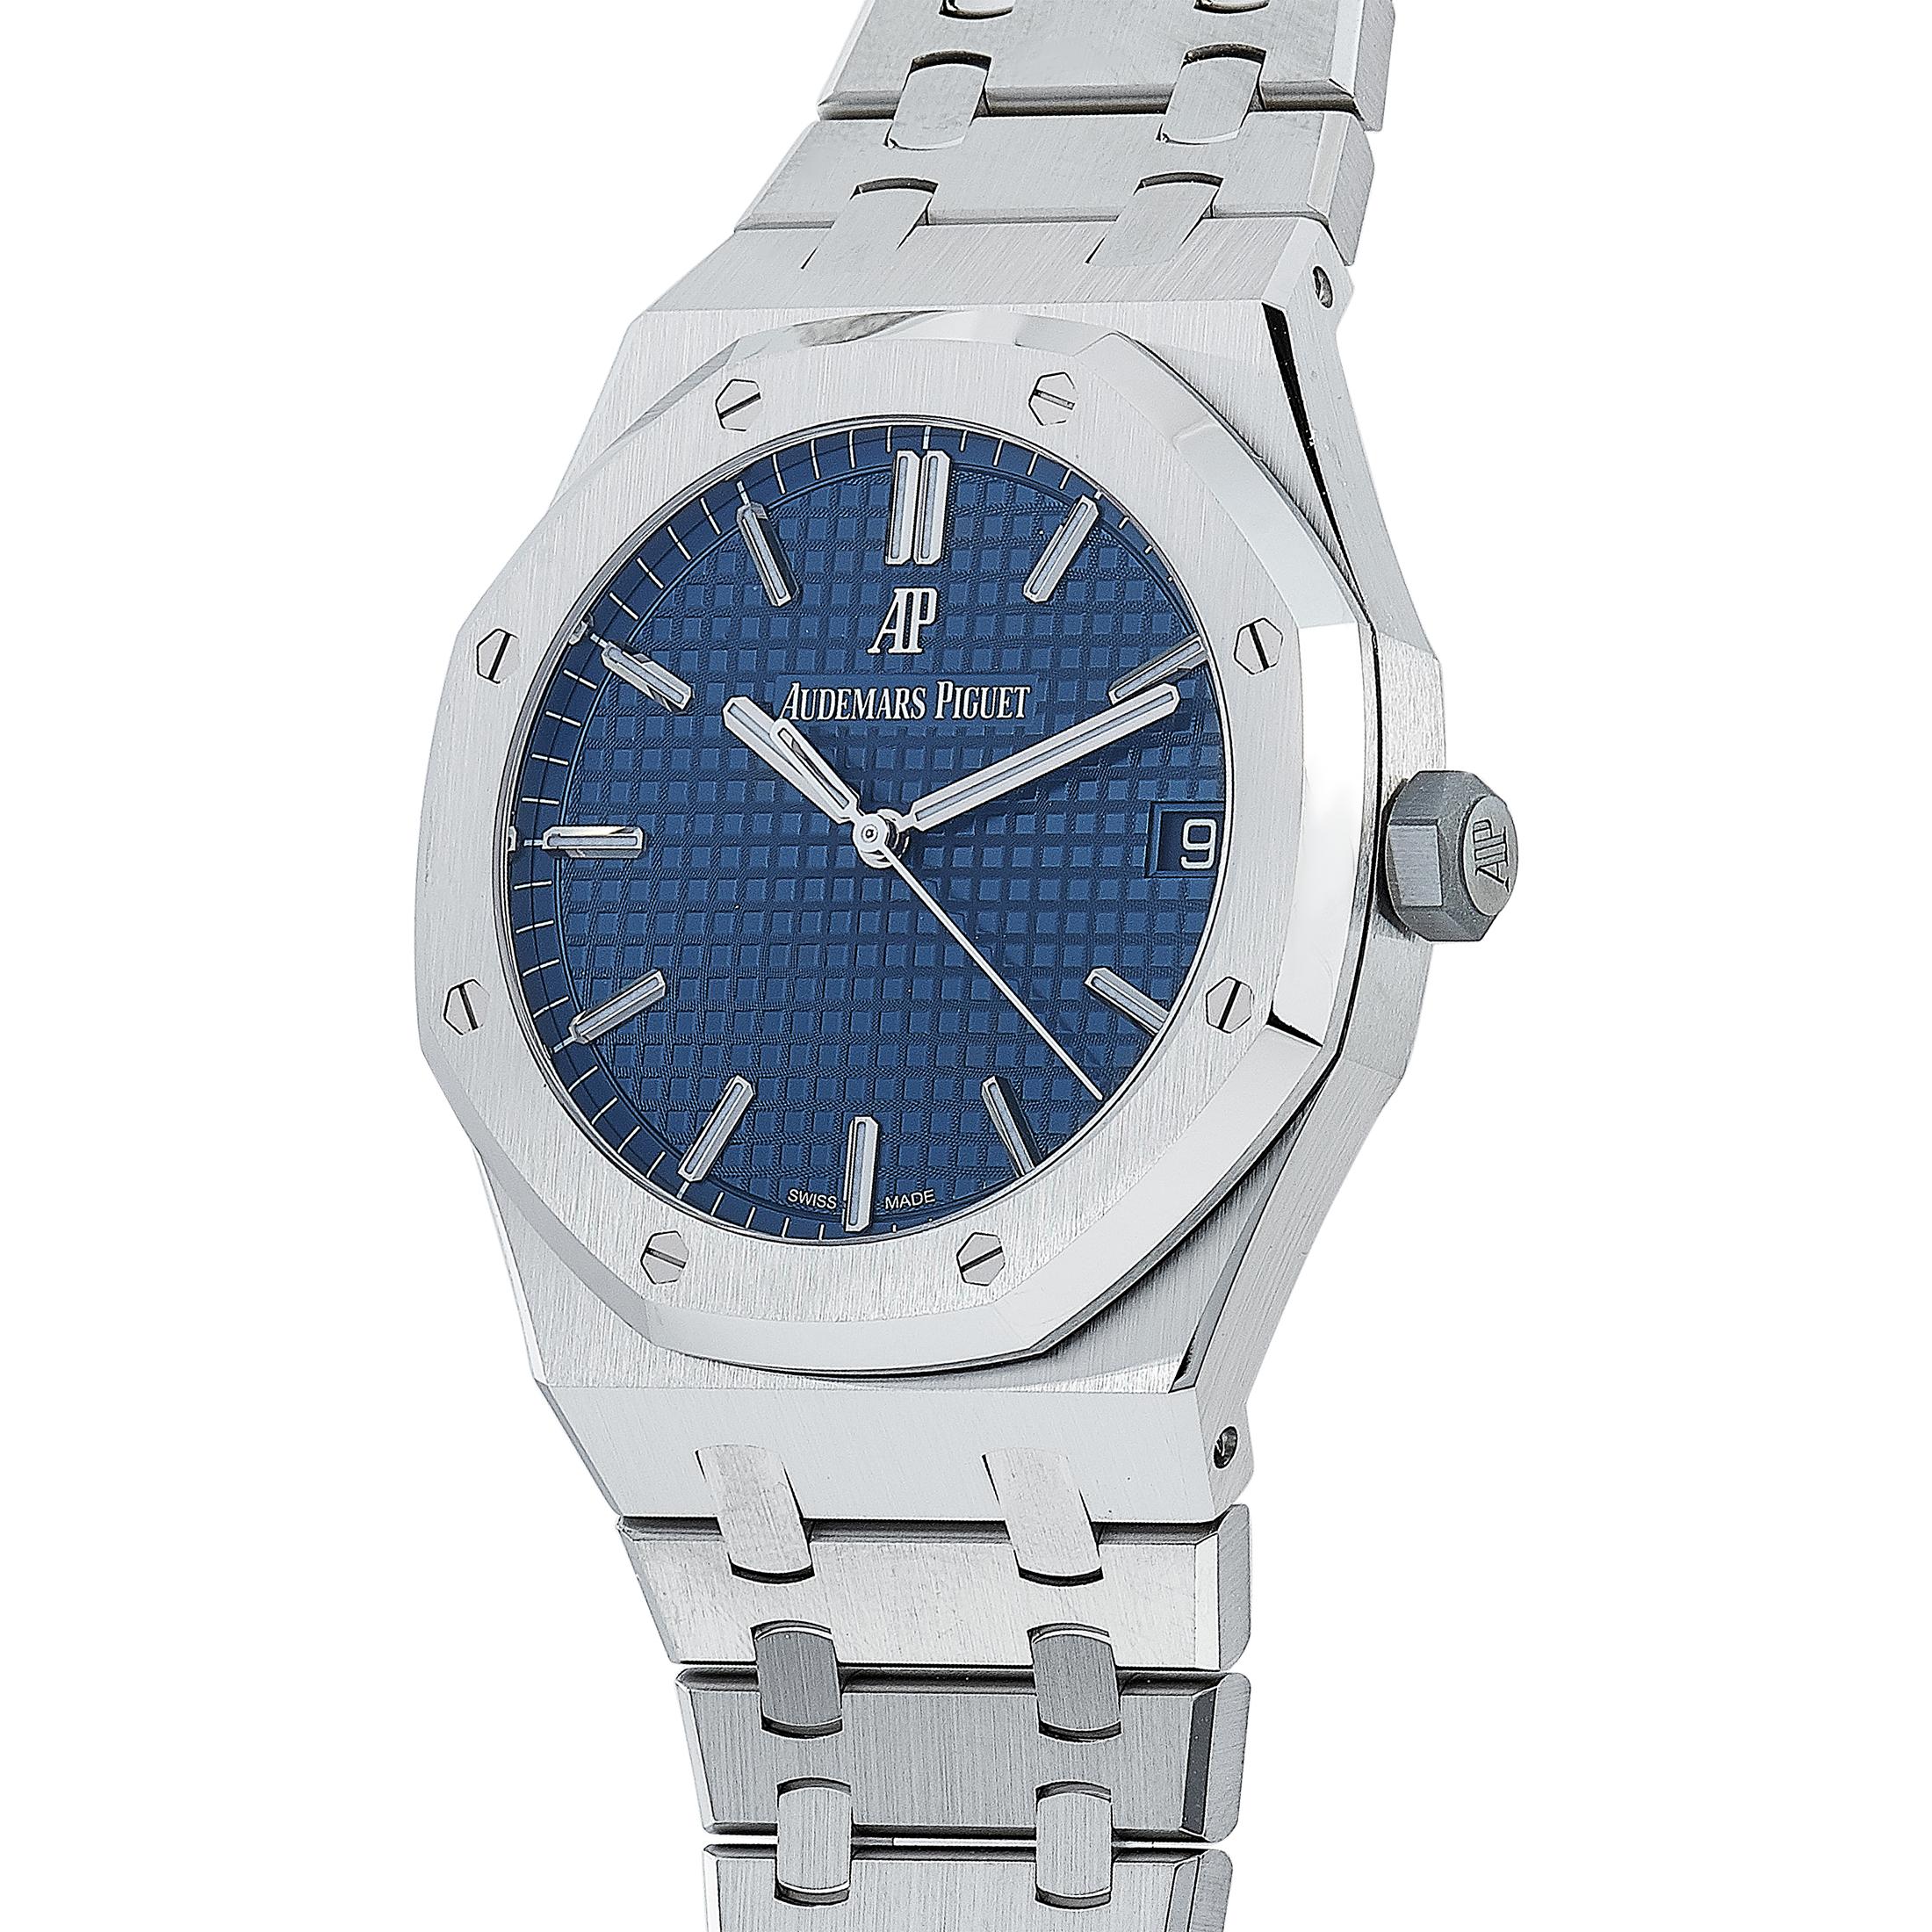 The Audemars Piguet Royal Oak Selfwinding, reference number 15500ST.OO.1220ST.01, is a member of the iconic “Royal Oak” collection.

The watch is presented with a 41 mm stainless steel case that boasts see-through sapphire crystal back. This model